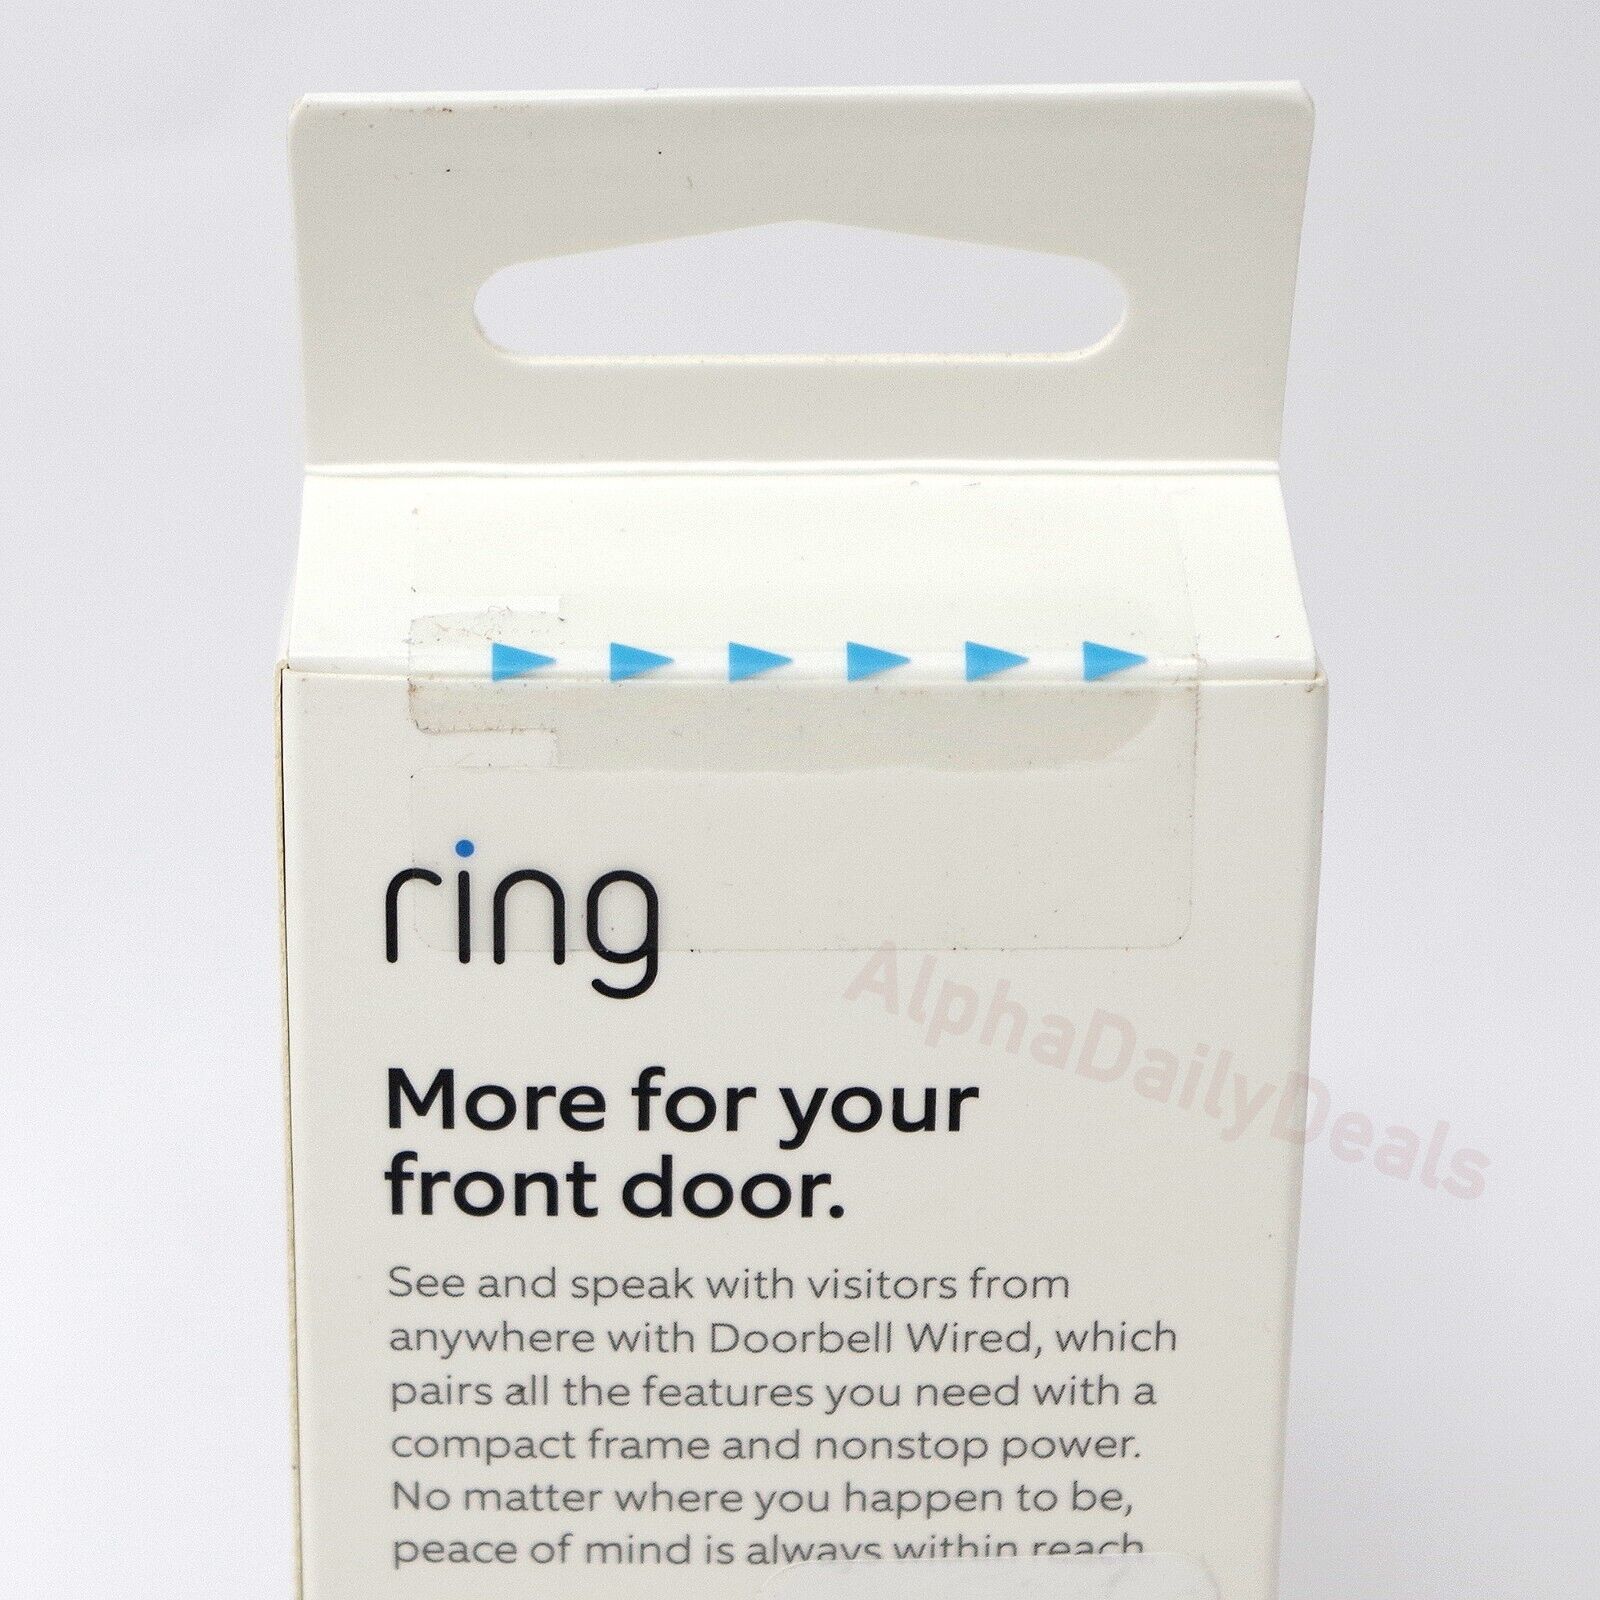 NEW Ring Smart HD Video Doorbell Security Wired WiFi Camera Night Vision Black